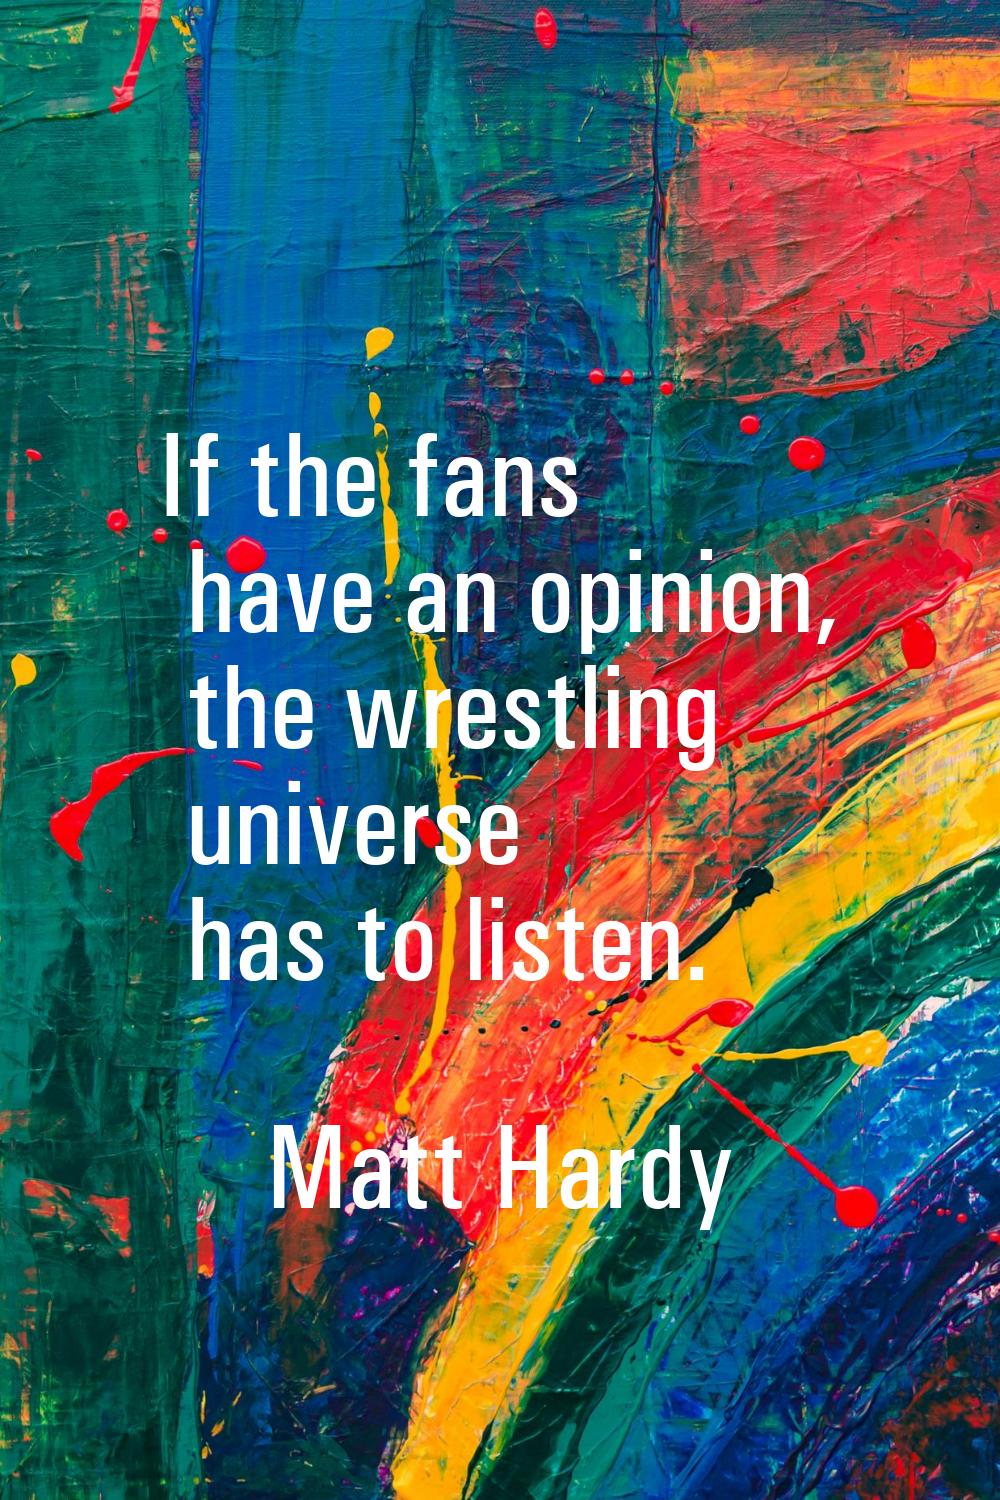 If the fans have an opinion, the wrestling universe has to listen.